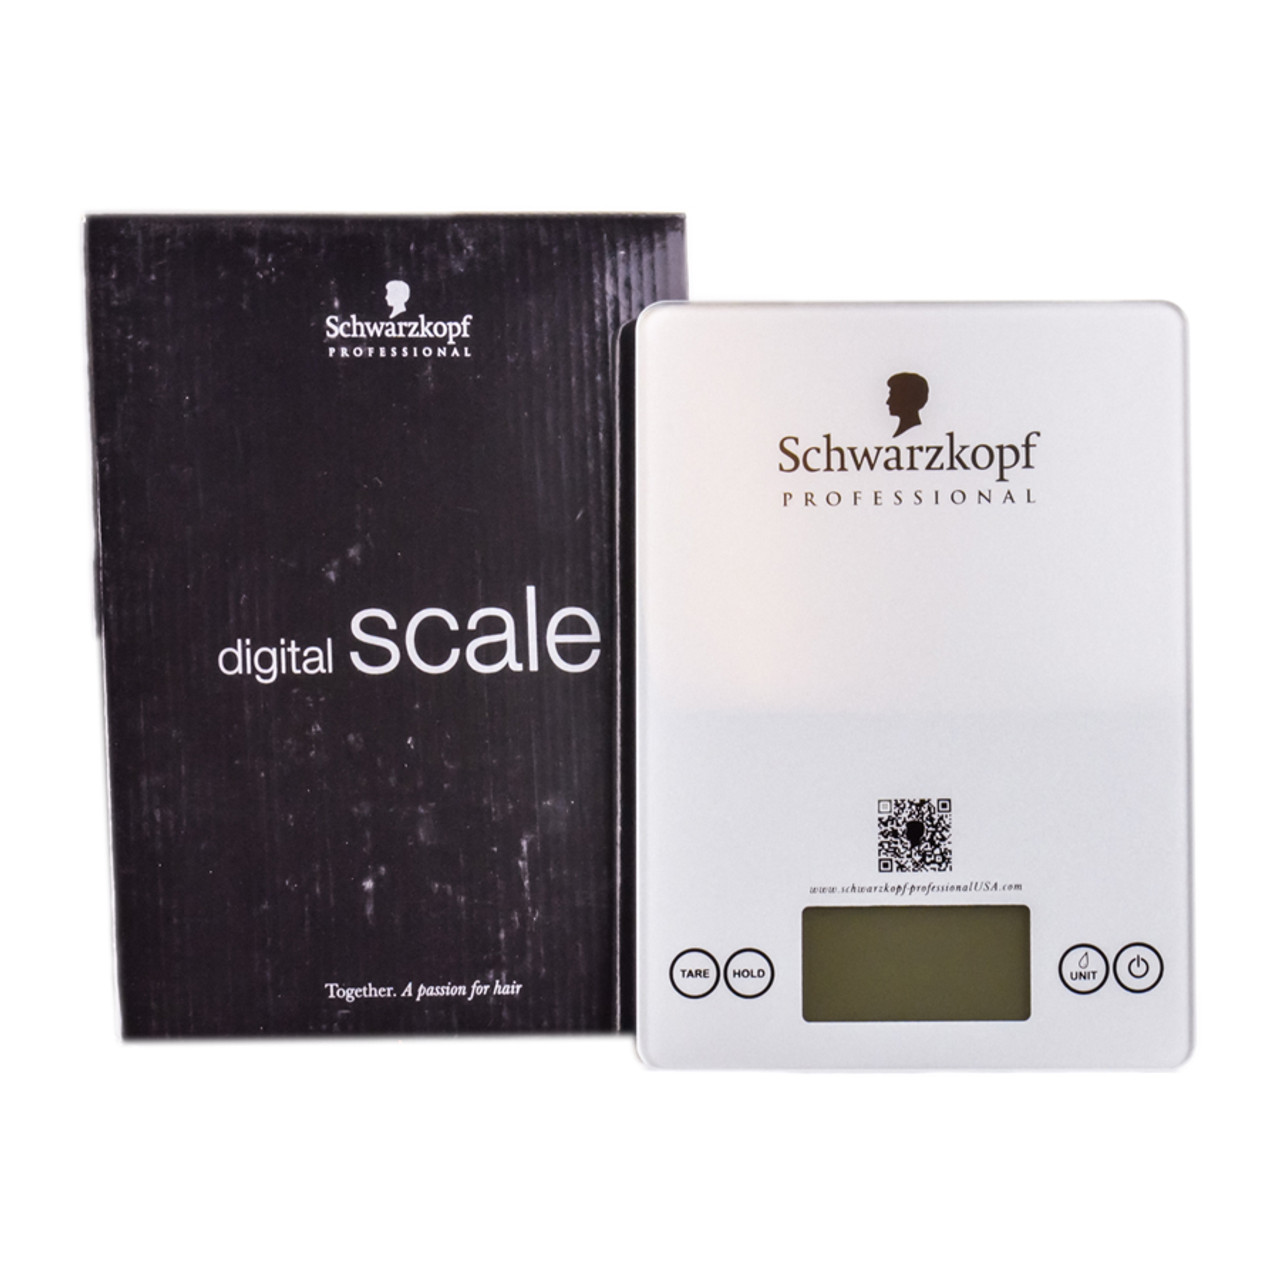 Professional digital scale for hair color